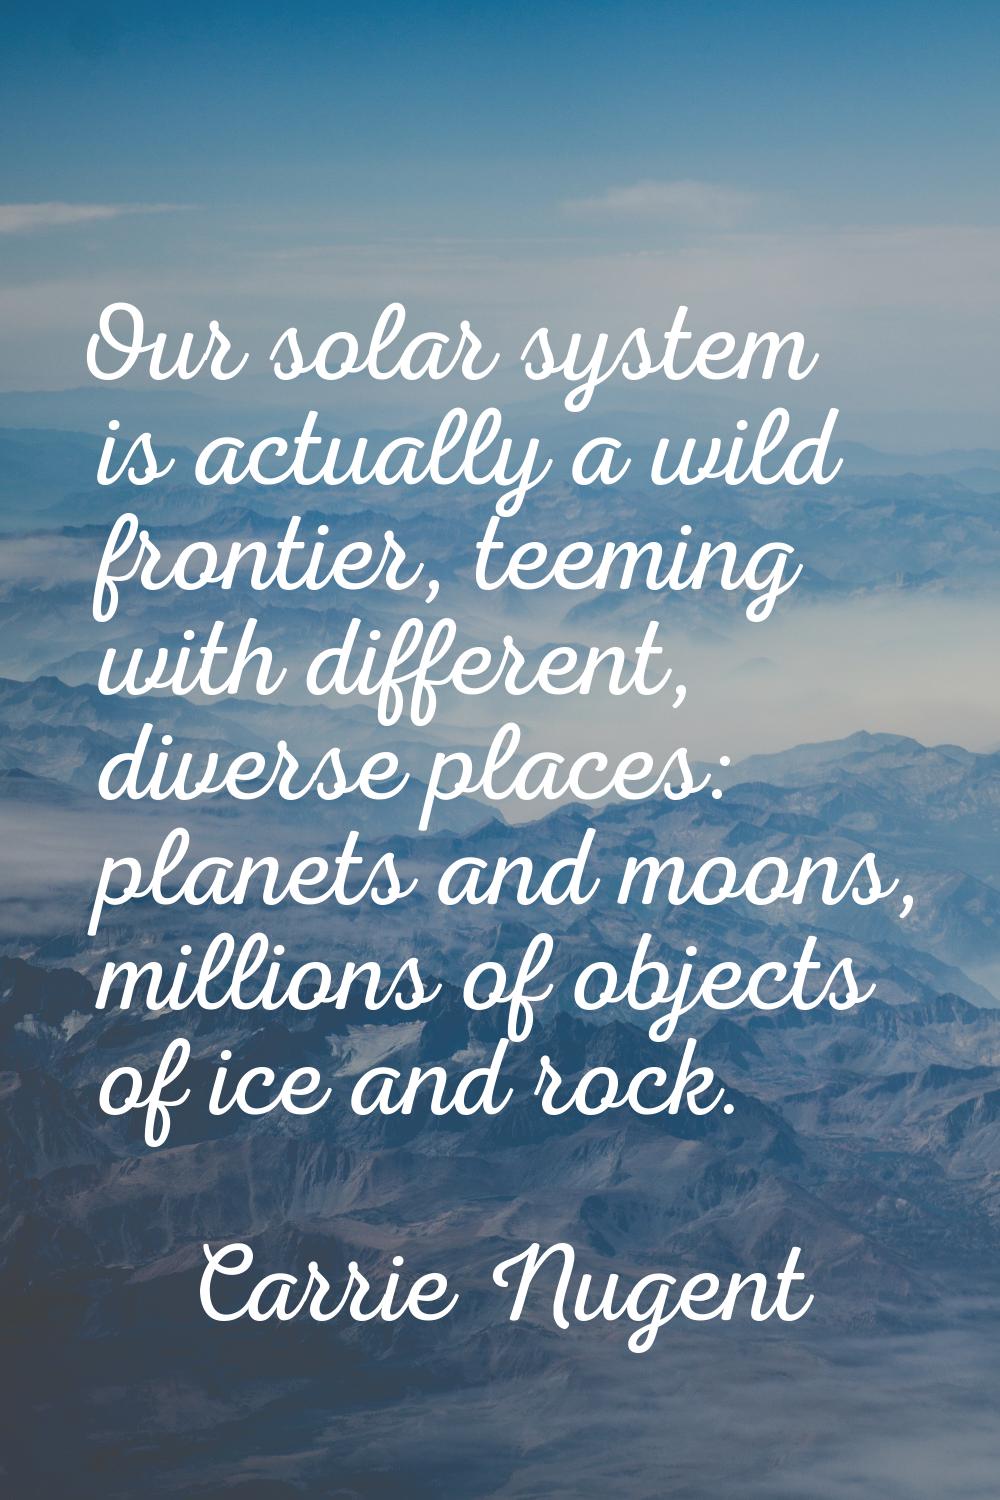 Our solar system is actually a wild frontier, teeming with different, diverse places: planets and m